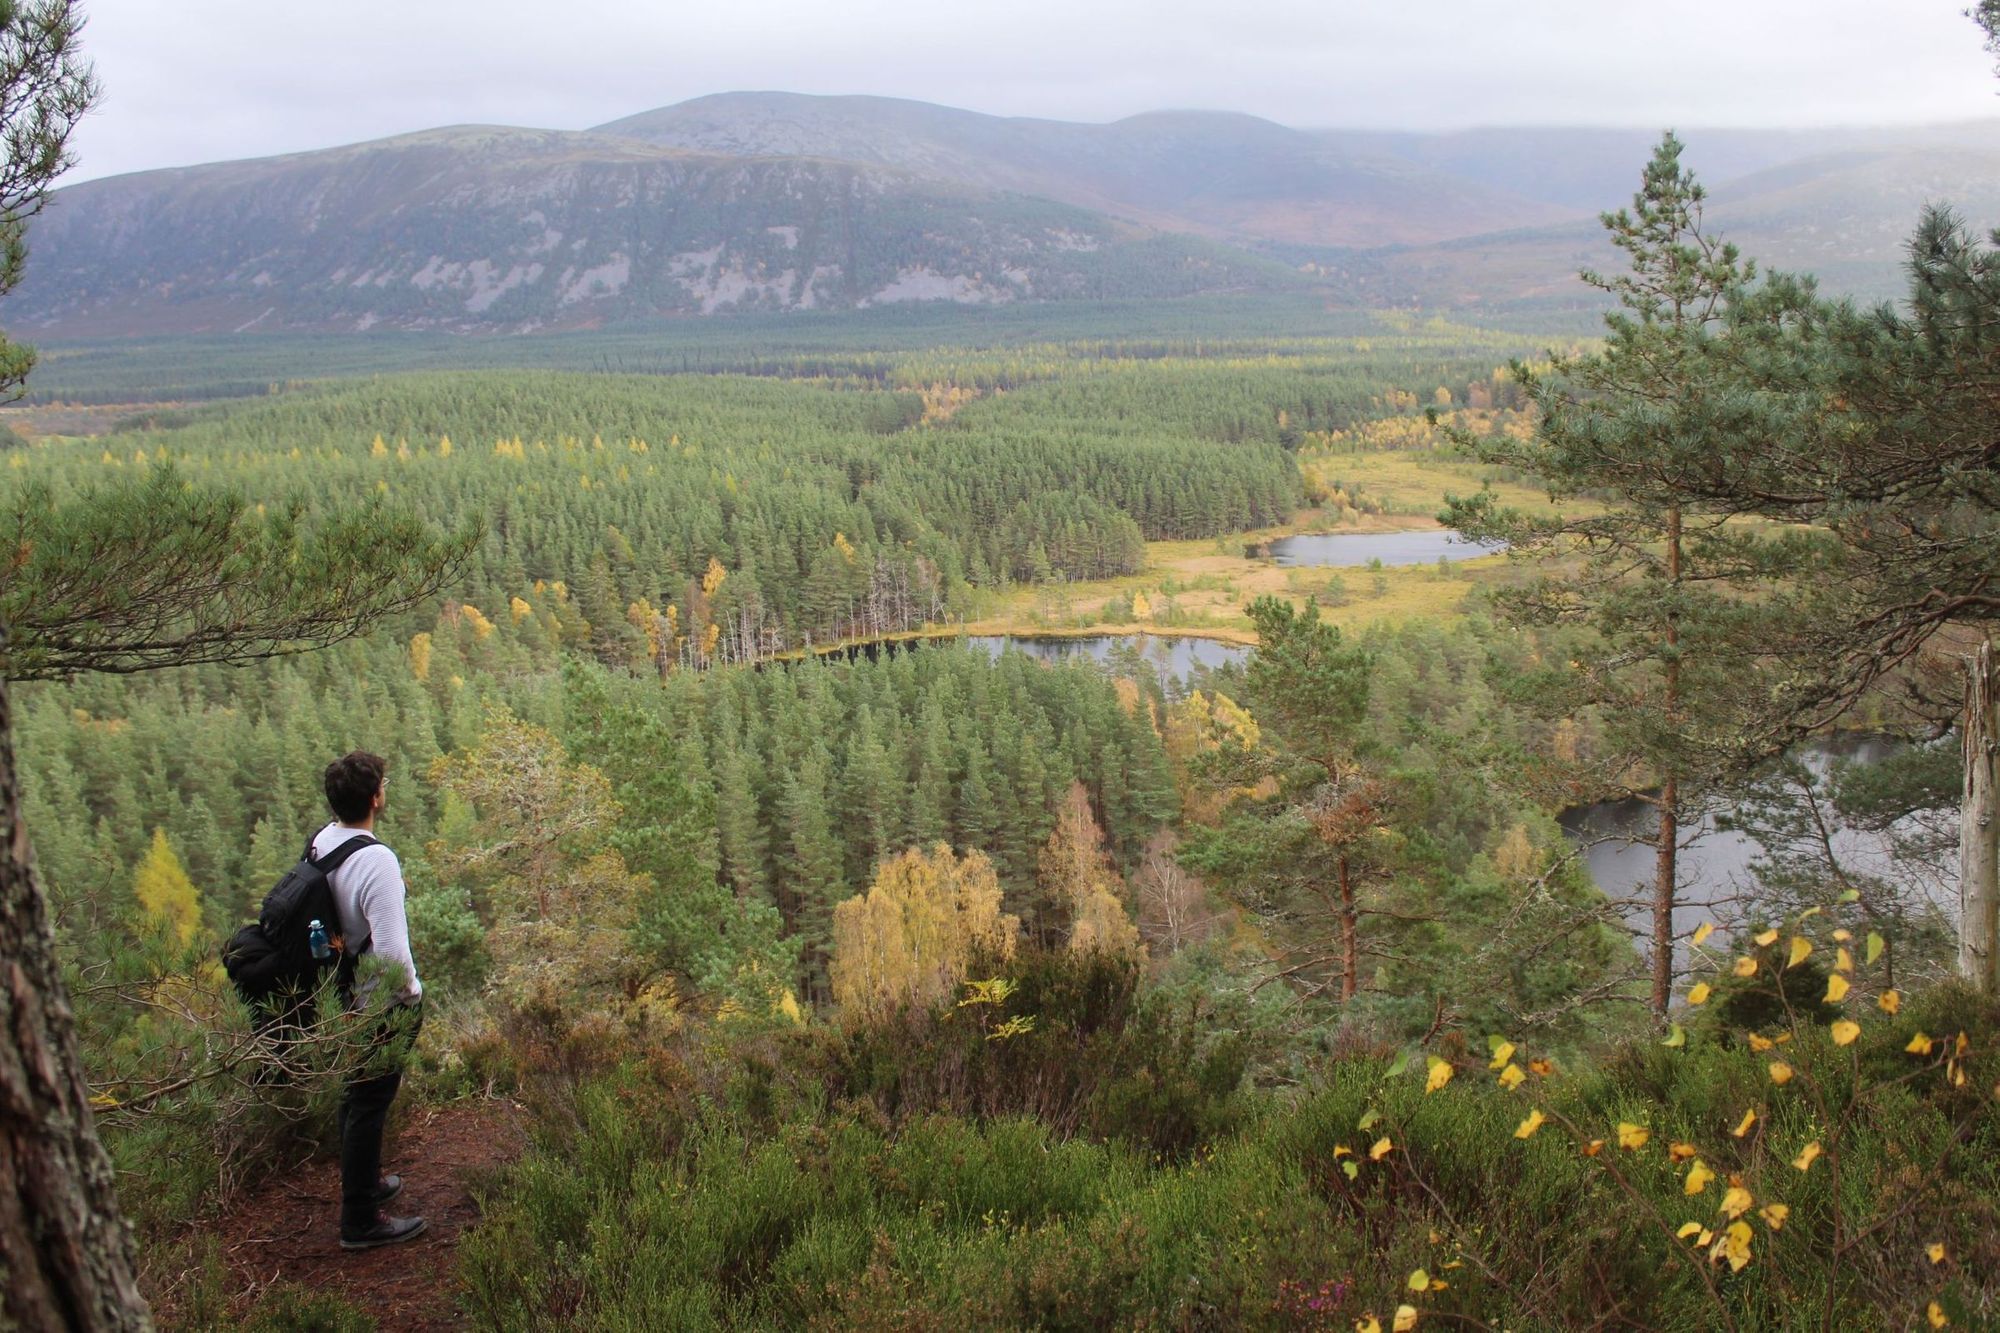 A man hiking Uath Lochans, in the Cairngorms National Park, Scotland.